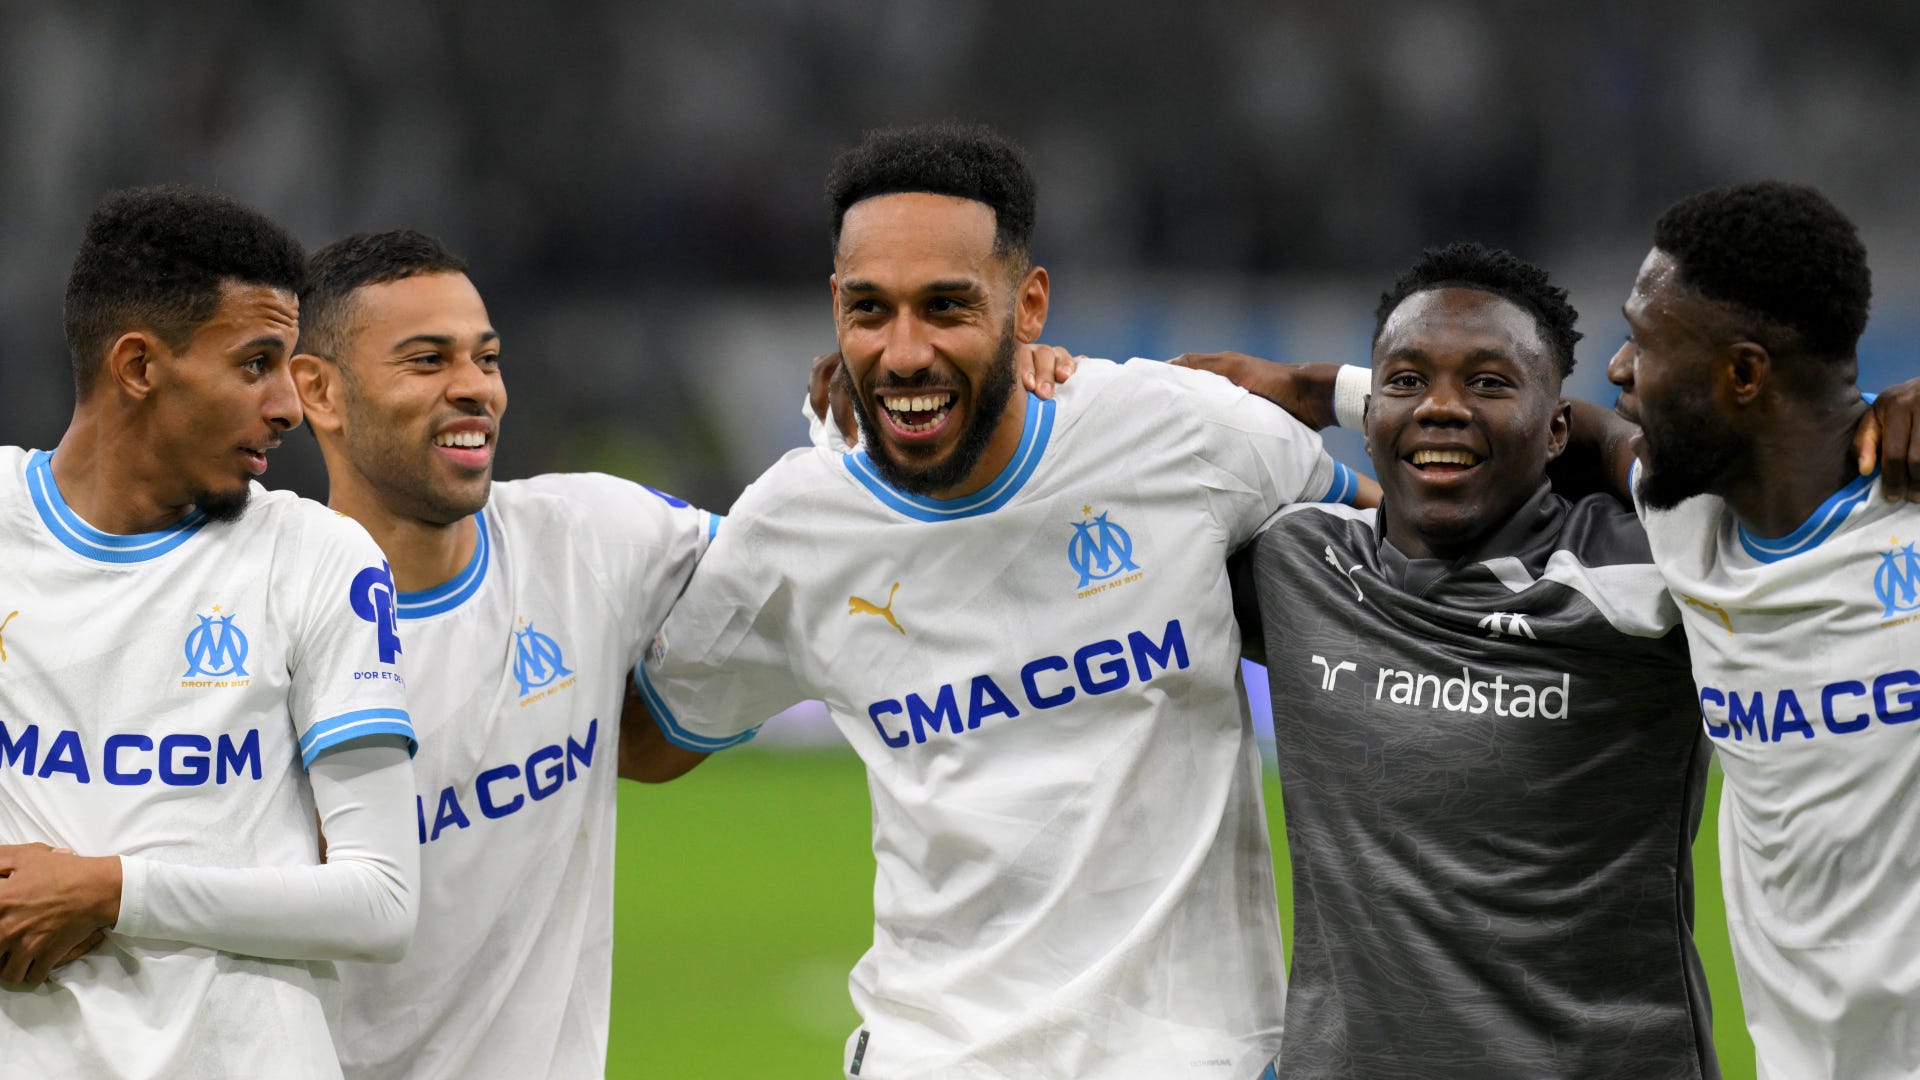 UEL: Former Arsenal captain saves Marseille, Brighton loses at home to AEK